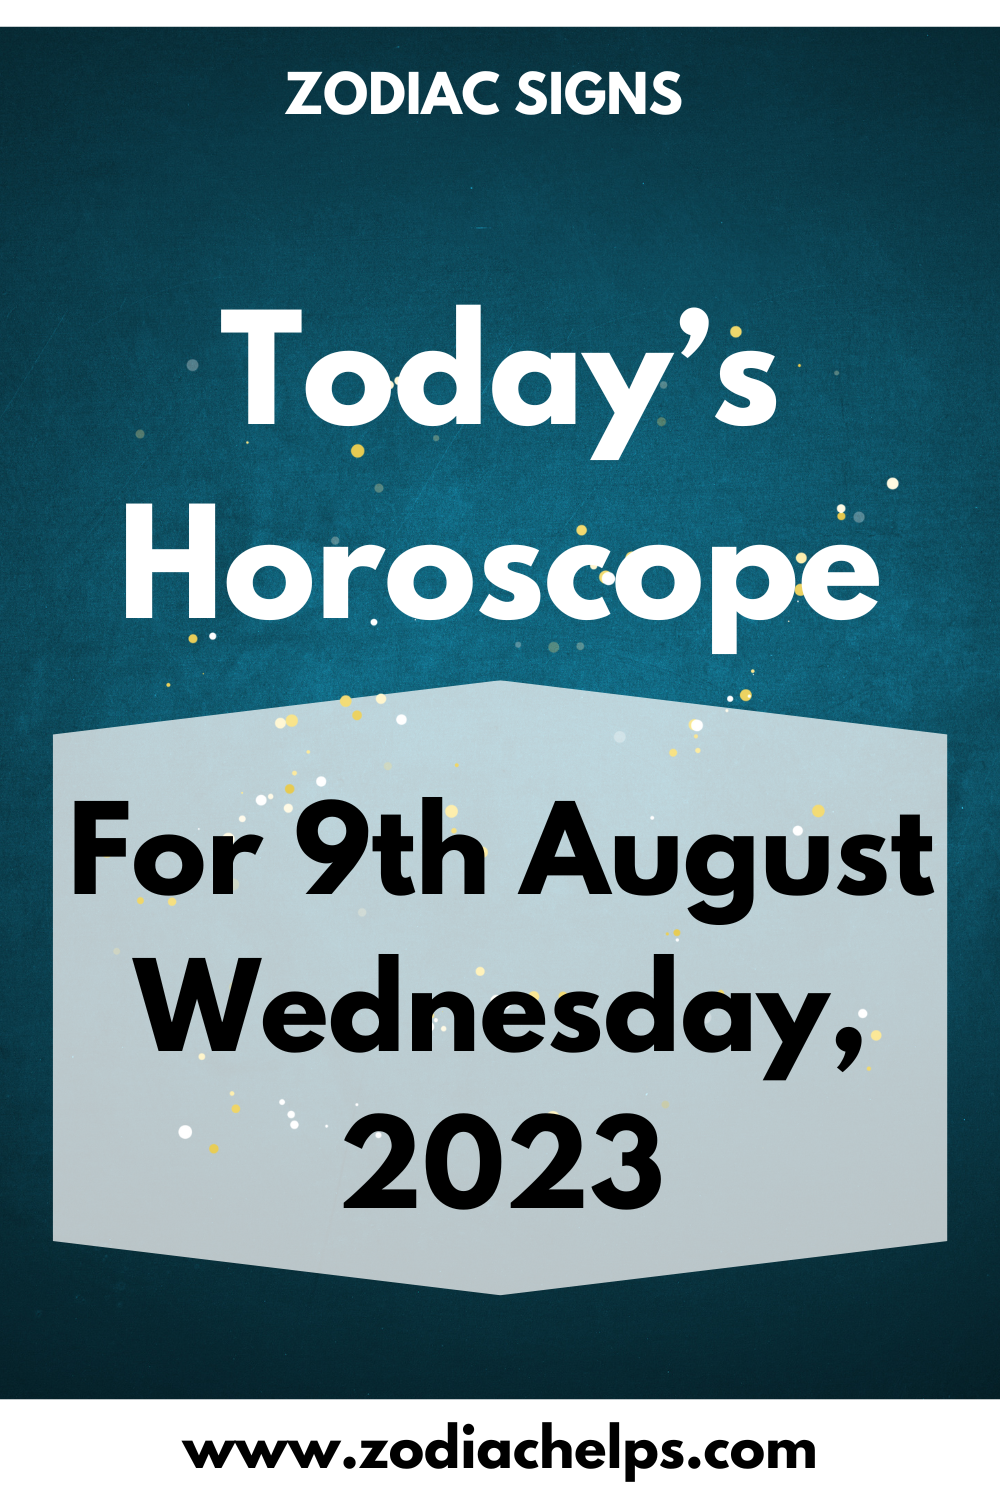 Today’s Horoscope for 9th August Wednesday, 2023